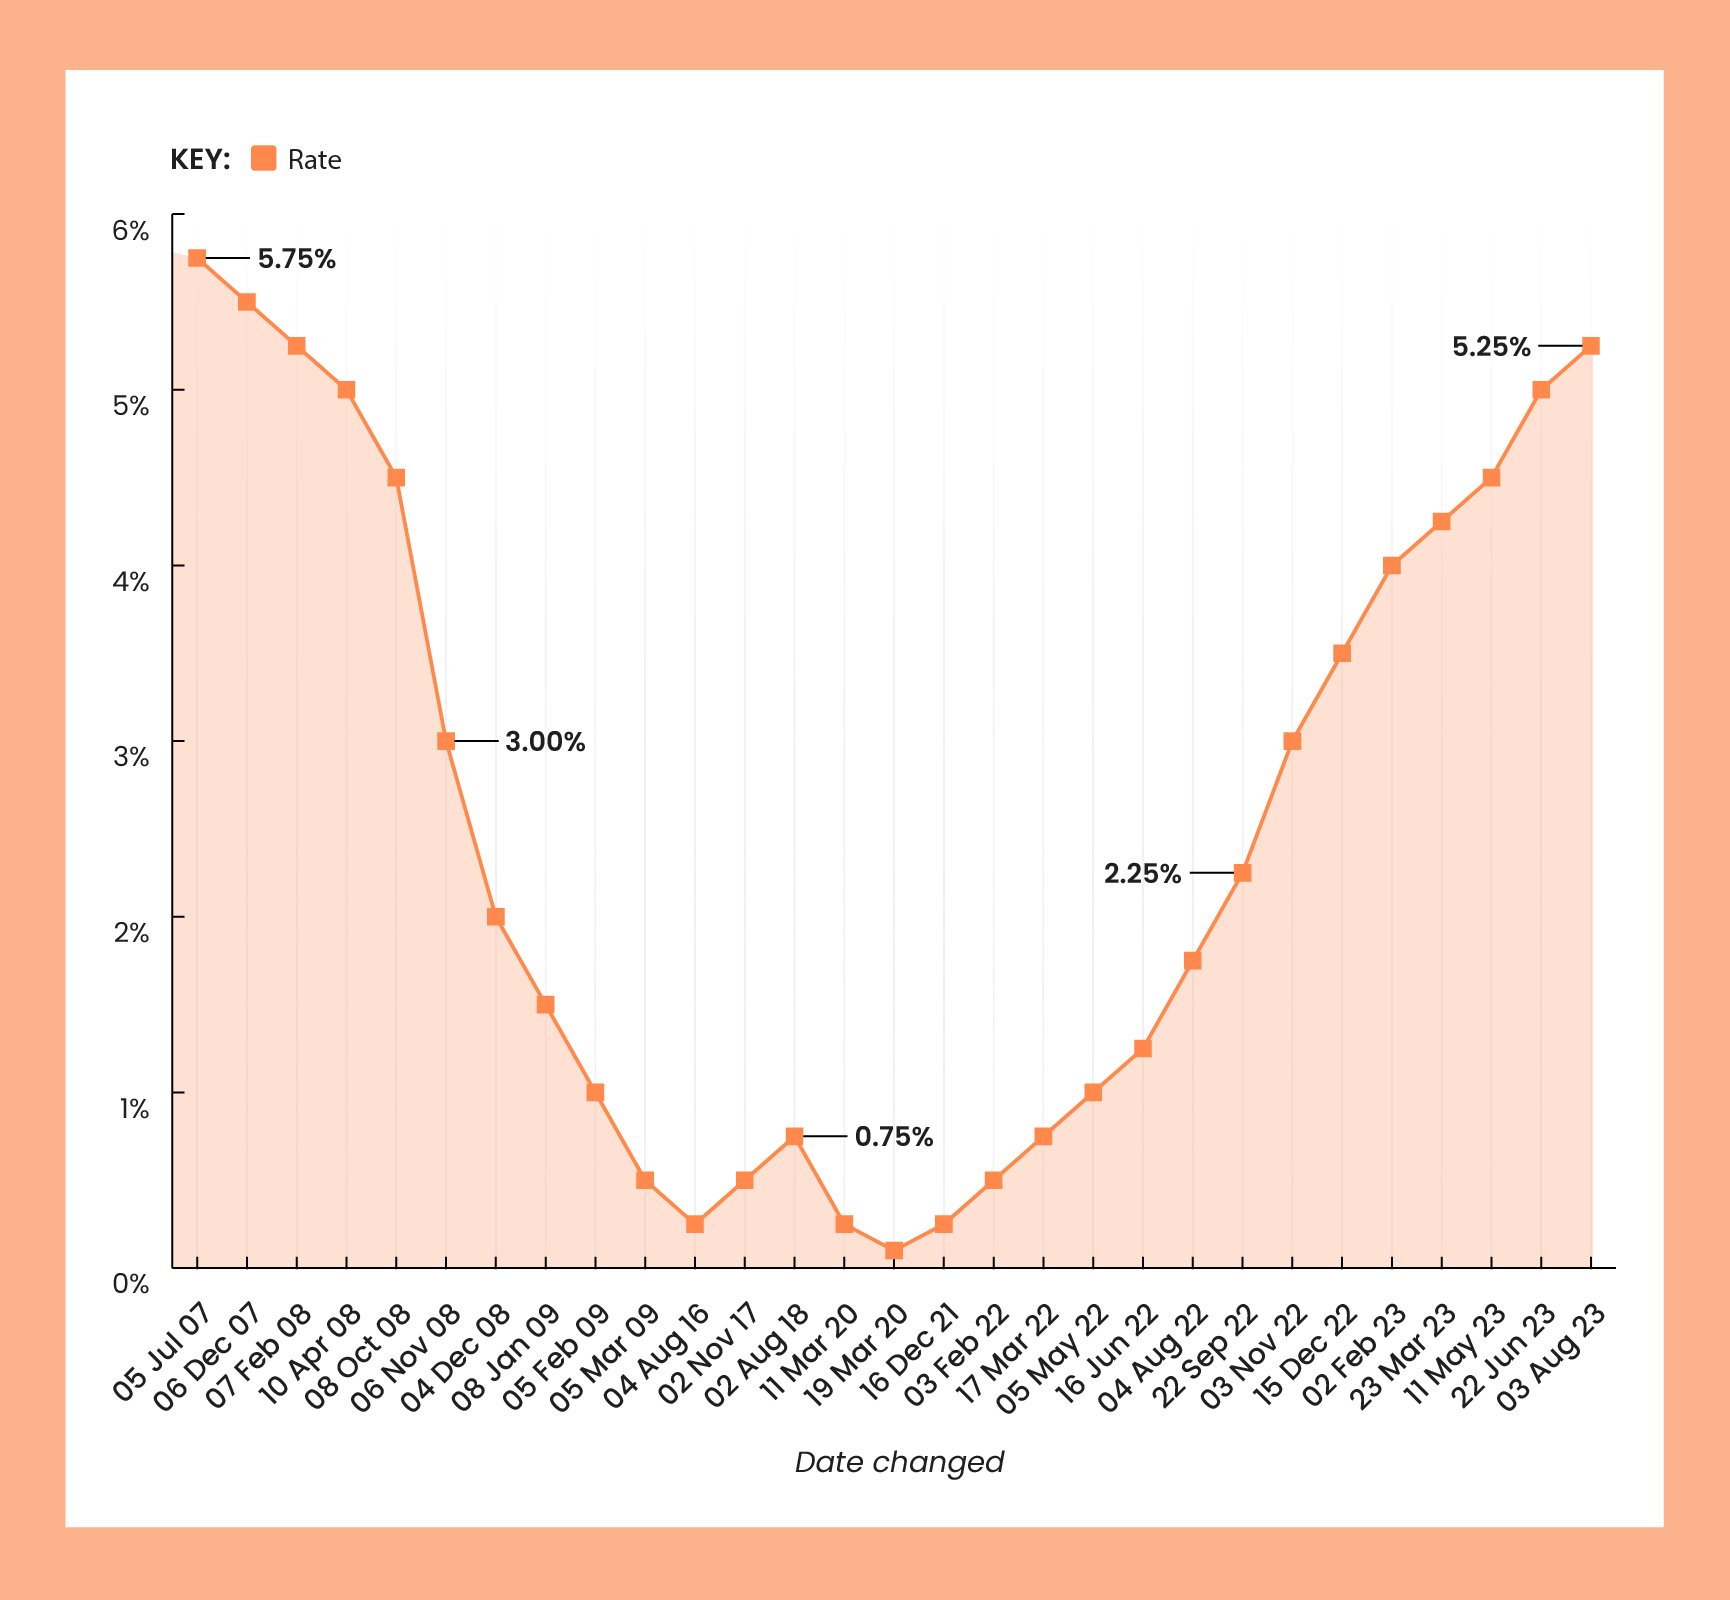 a line graph on a white background with a light orange border showing the UK base rate percentage from July 2007 to August 2023